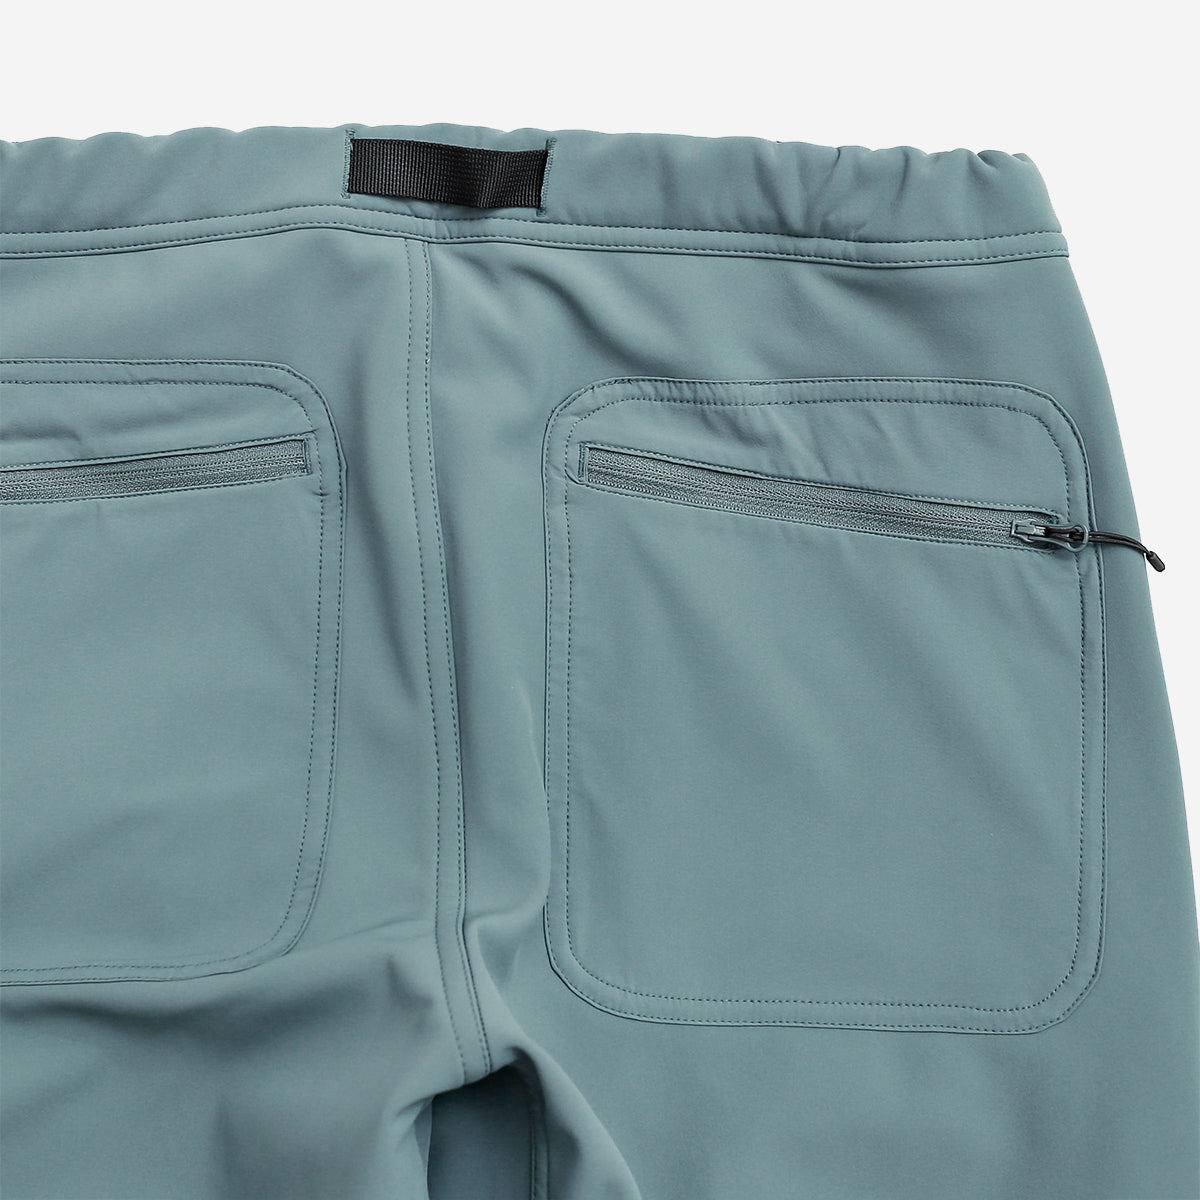 Warm Double Layer Pants - Teal Blue